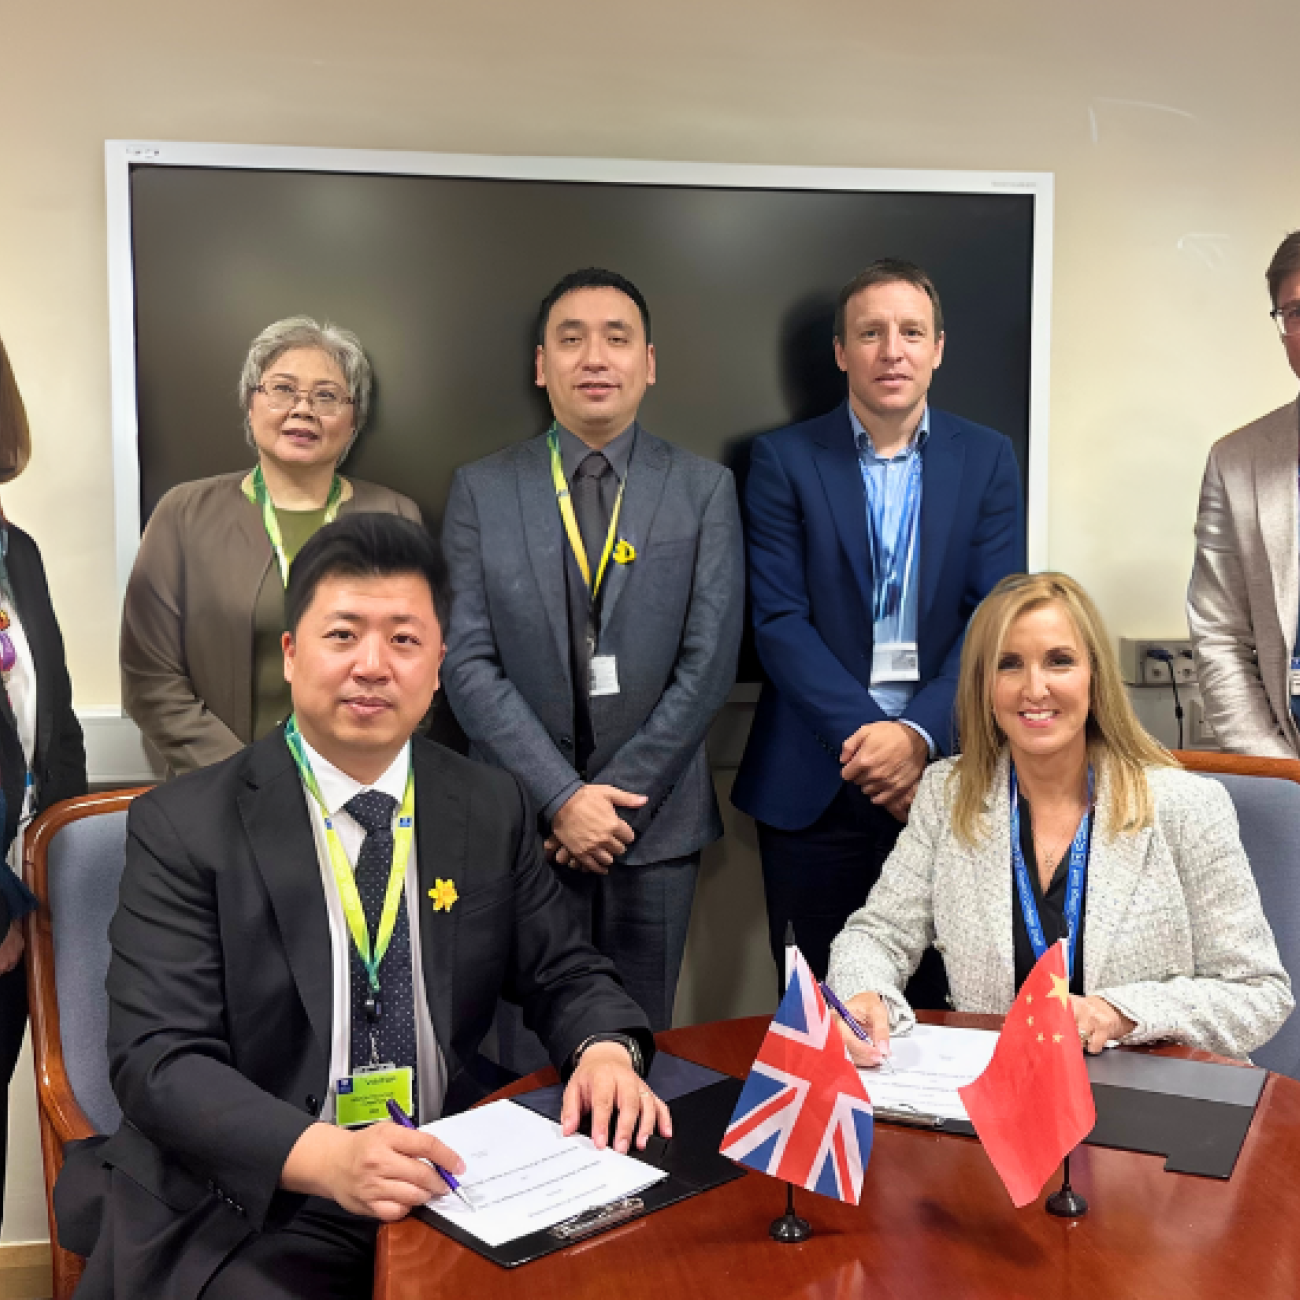 Shanghai Zhiwai Education Technology delegation, with Weston College colleagues whilst signatures are taking place